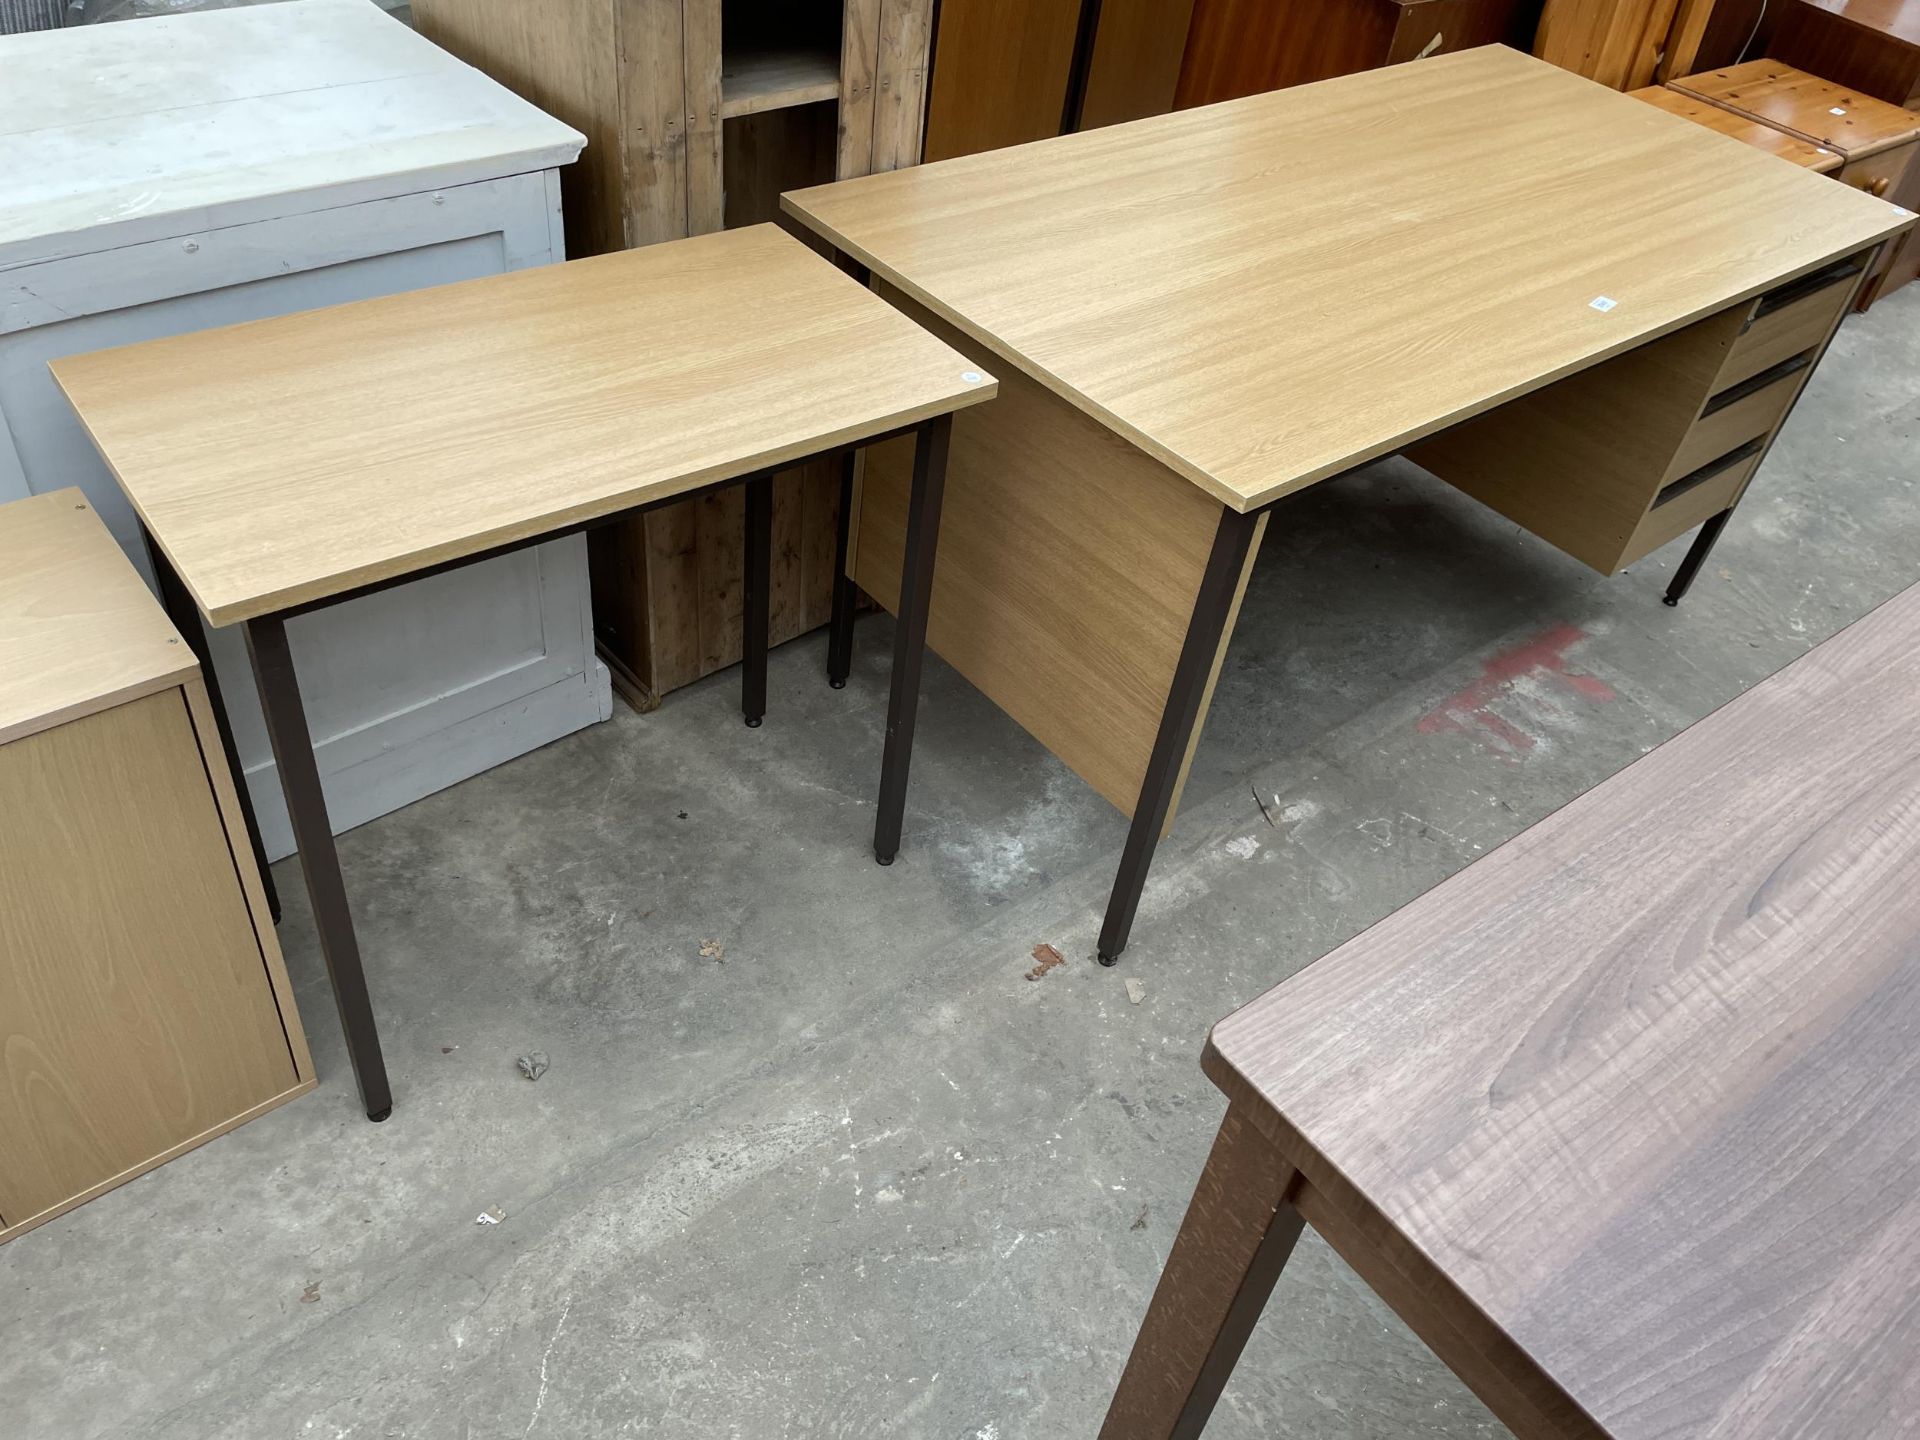 A SINGLE PEDESTAL DESK 59" X 29" AND MATCHING TABLE